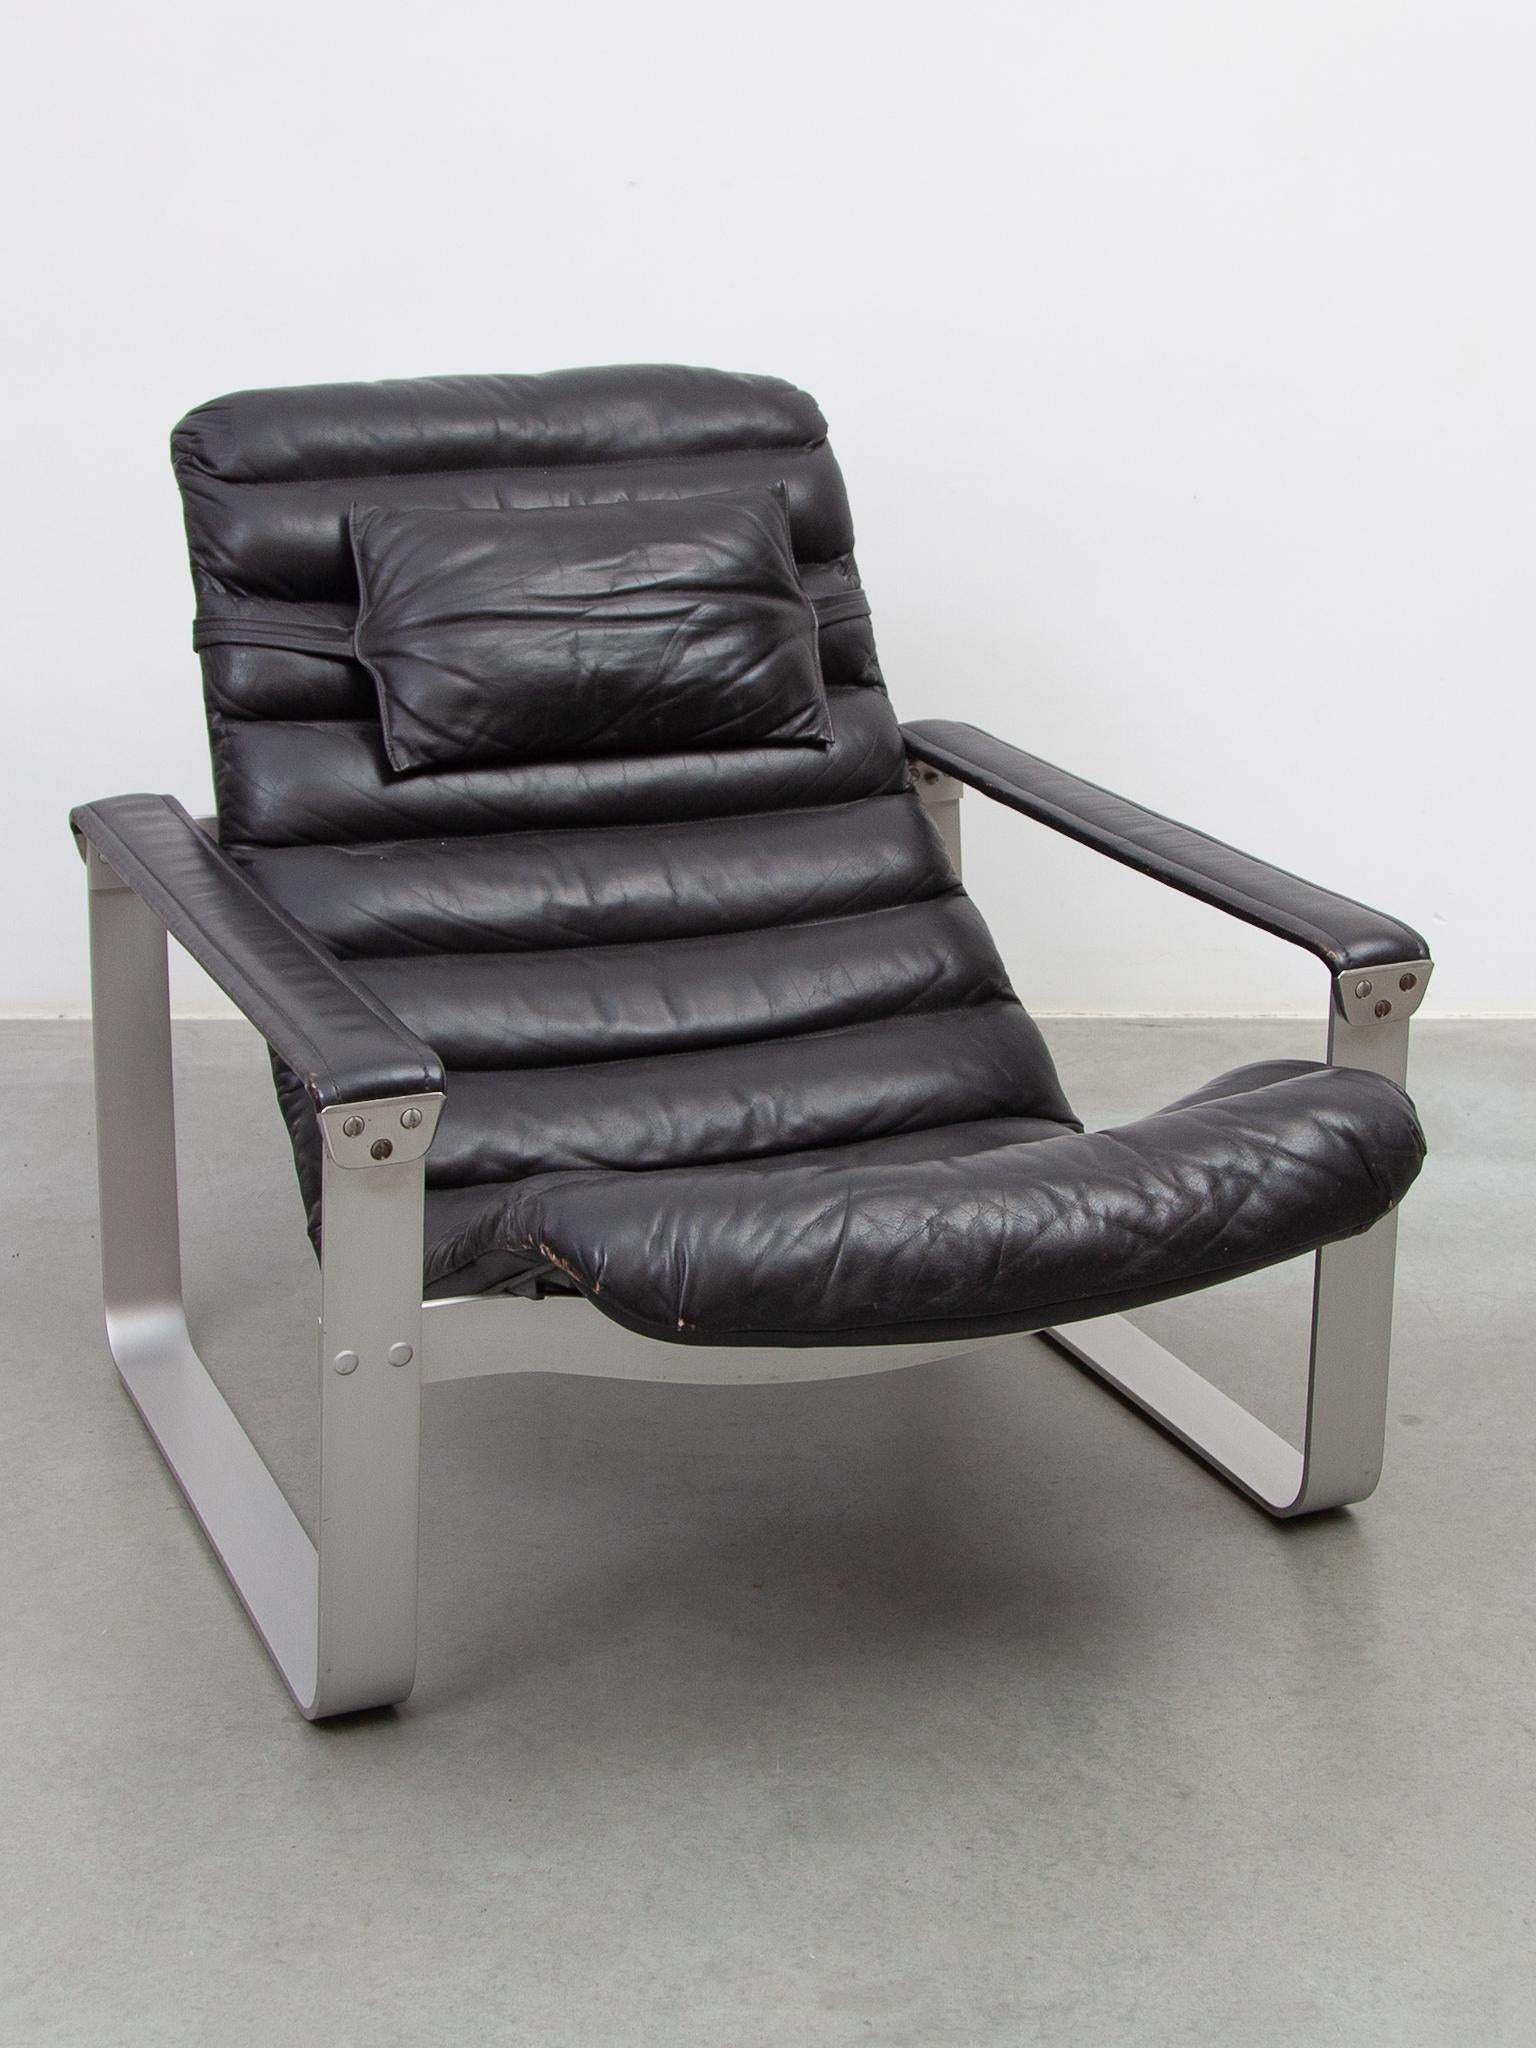 Aluminum Pulkka Lounge Chair designed by Ilmari Lappalainen by ASKO, Finland, 1968 For Sale